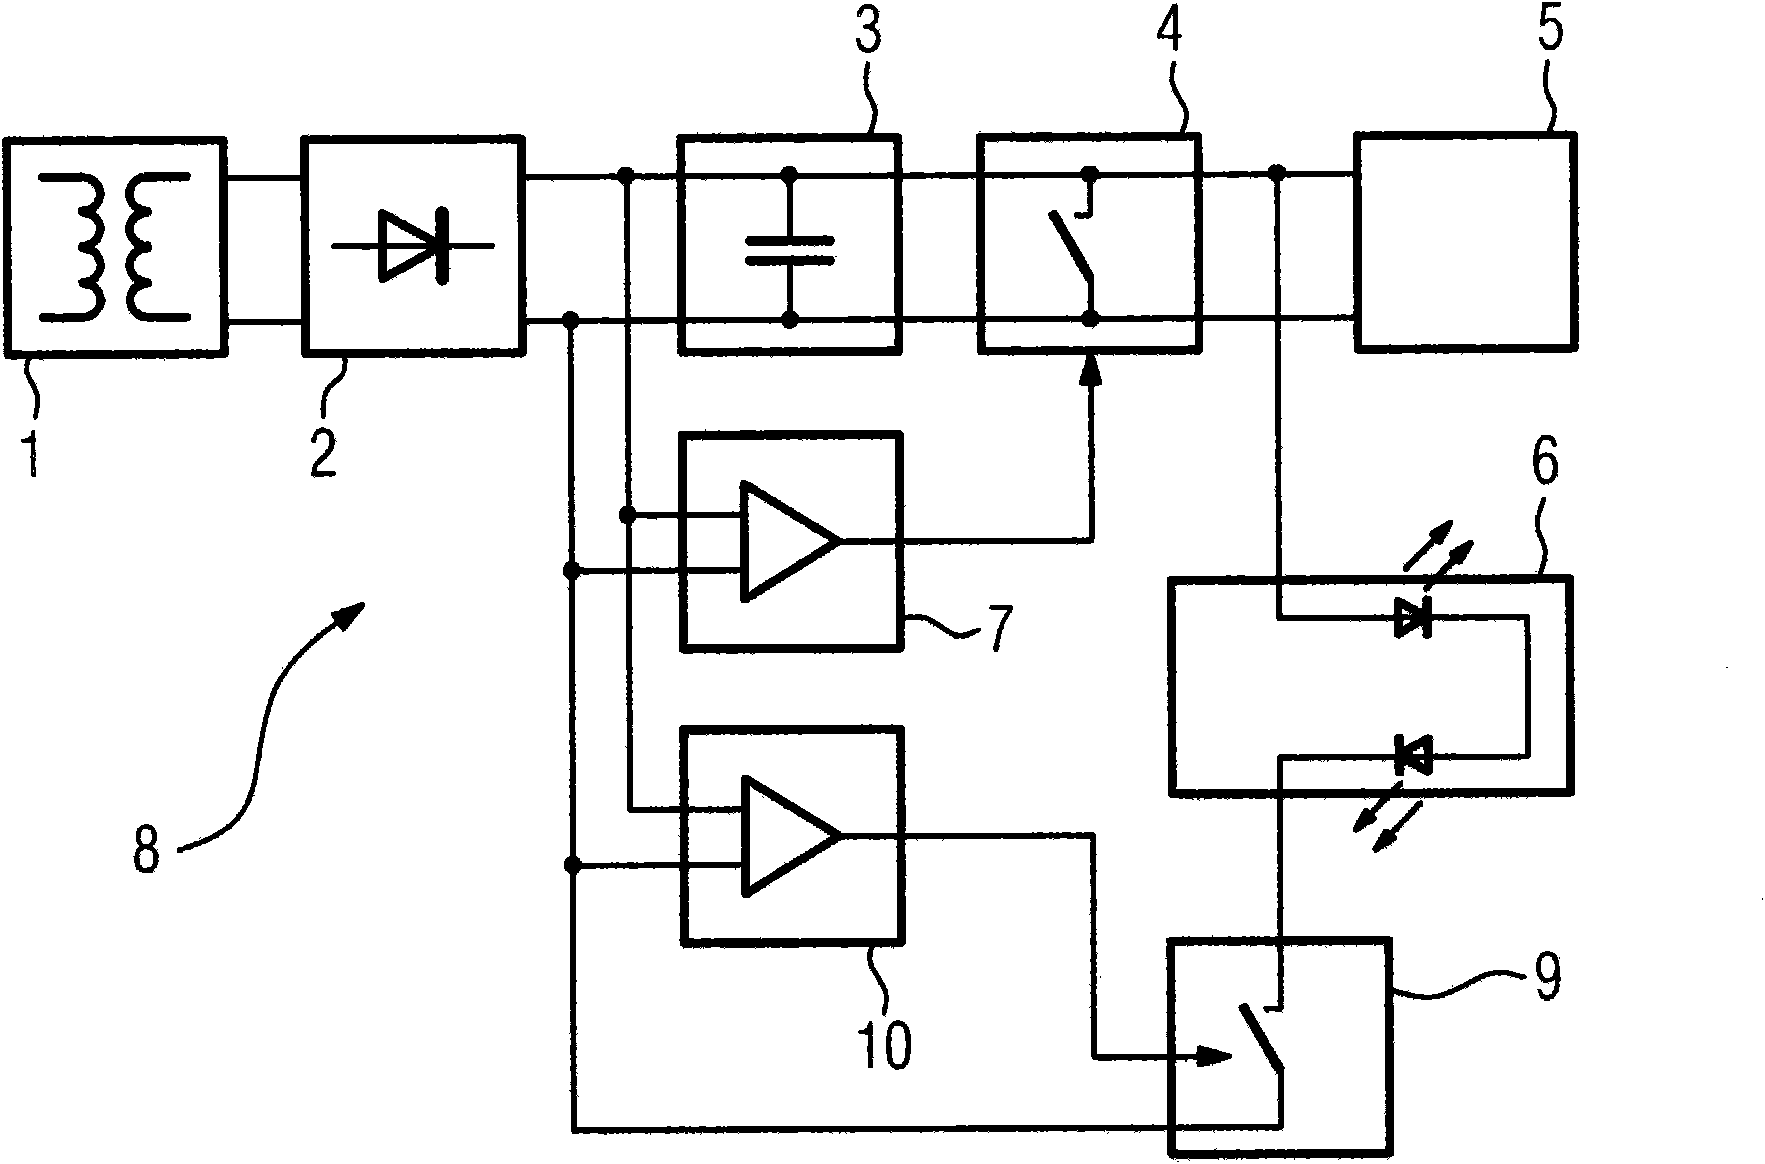 Control of the display background illumination in a power switch